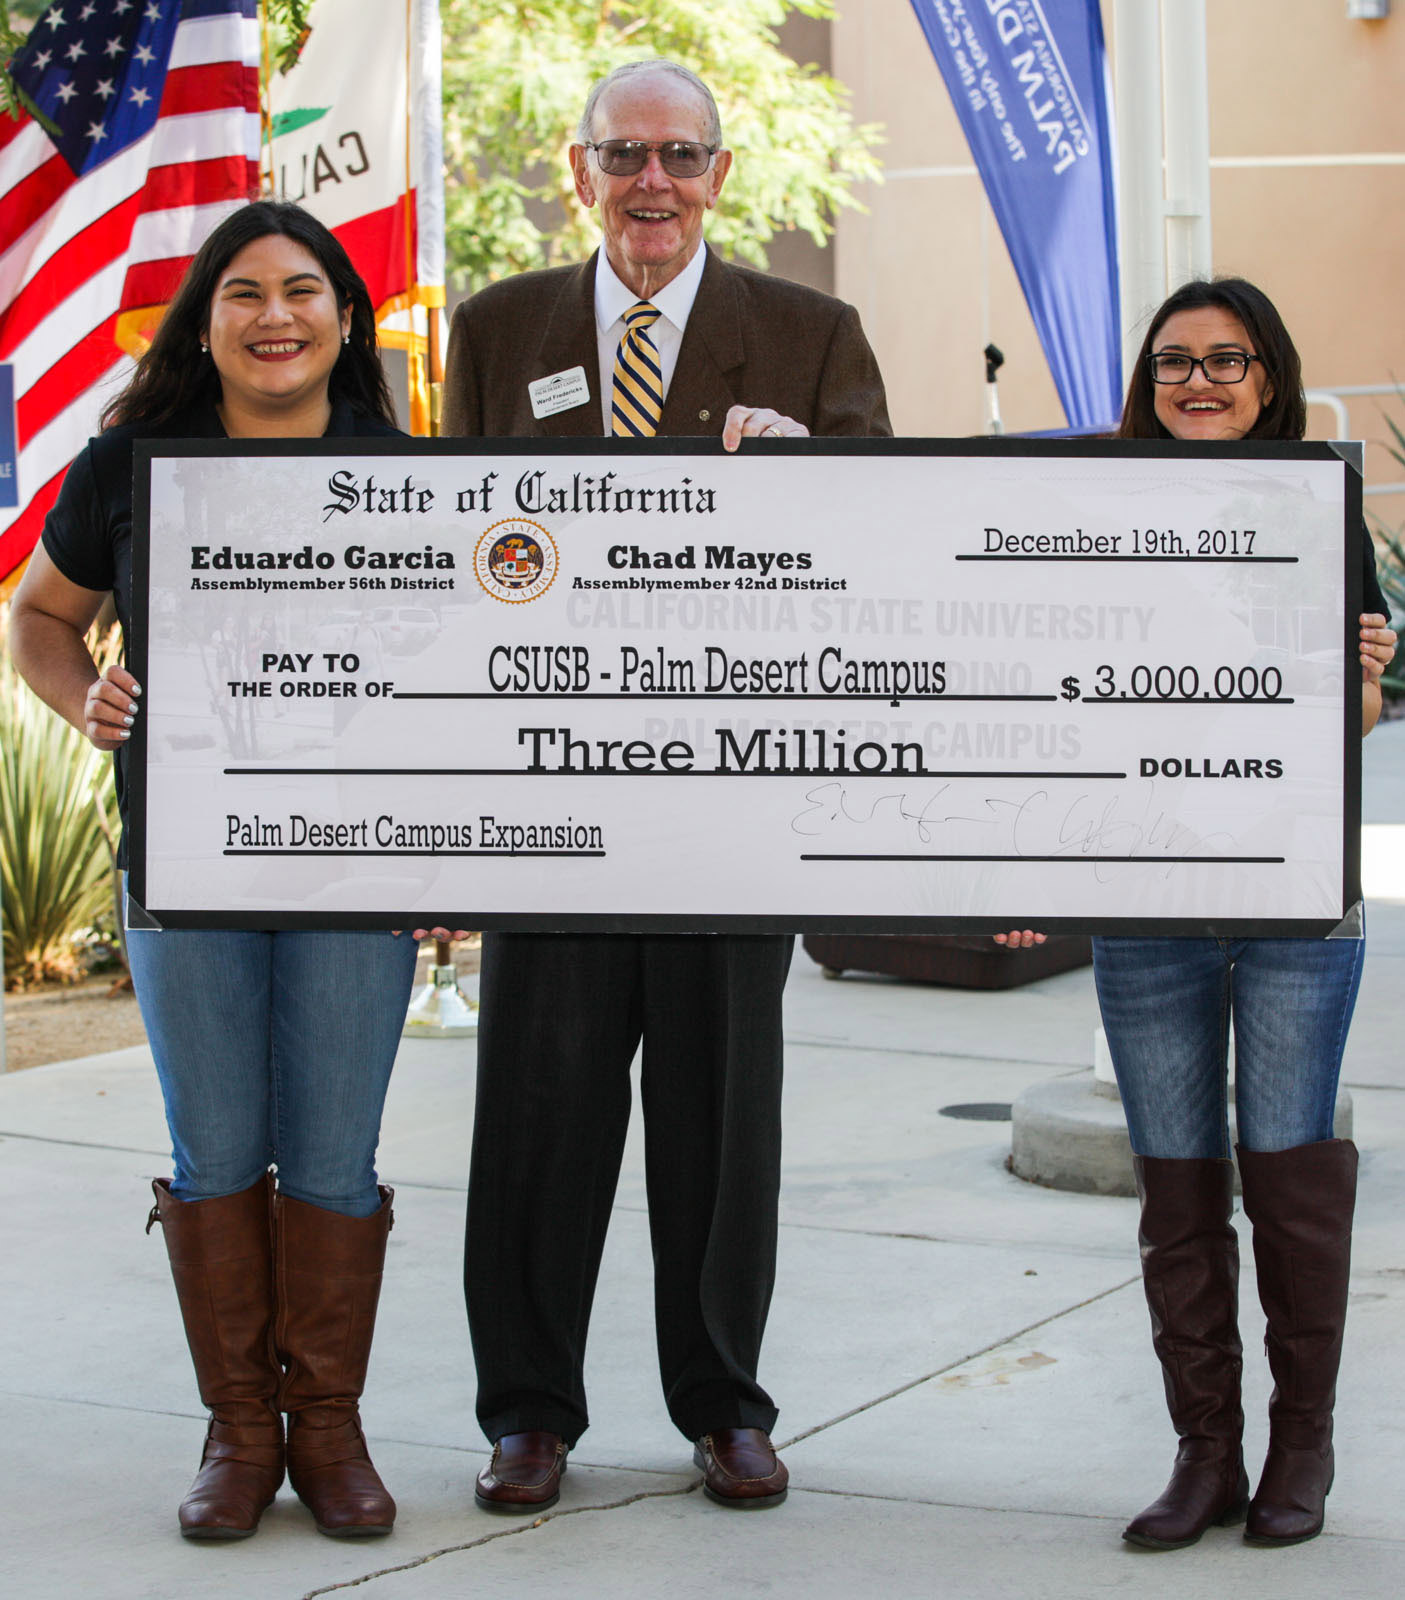 Advancement Board President Ward Fredericks (center) holds the ceremonial check symbolizing the state’s $3 million commitment to the CSUSB Palm Desert Campus. With him are PDC Student Ambassadors Nadia Fuentes (l) and Stephanie Uriarte (r). 